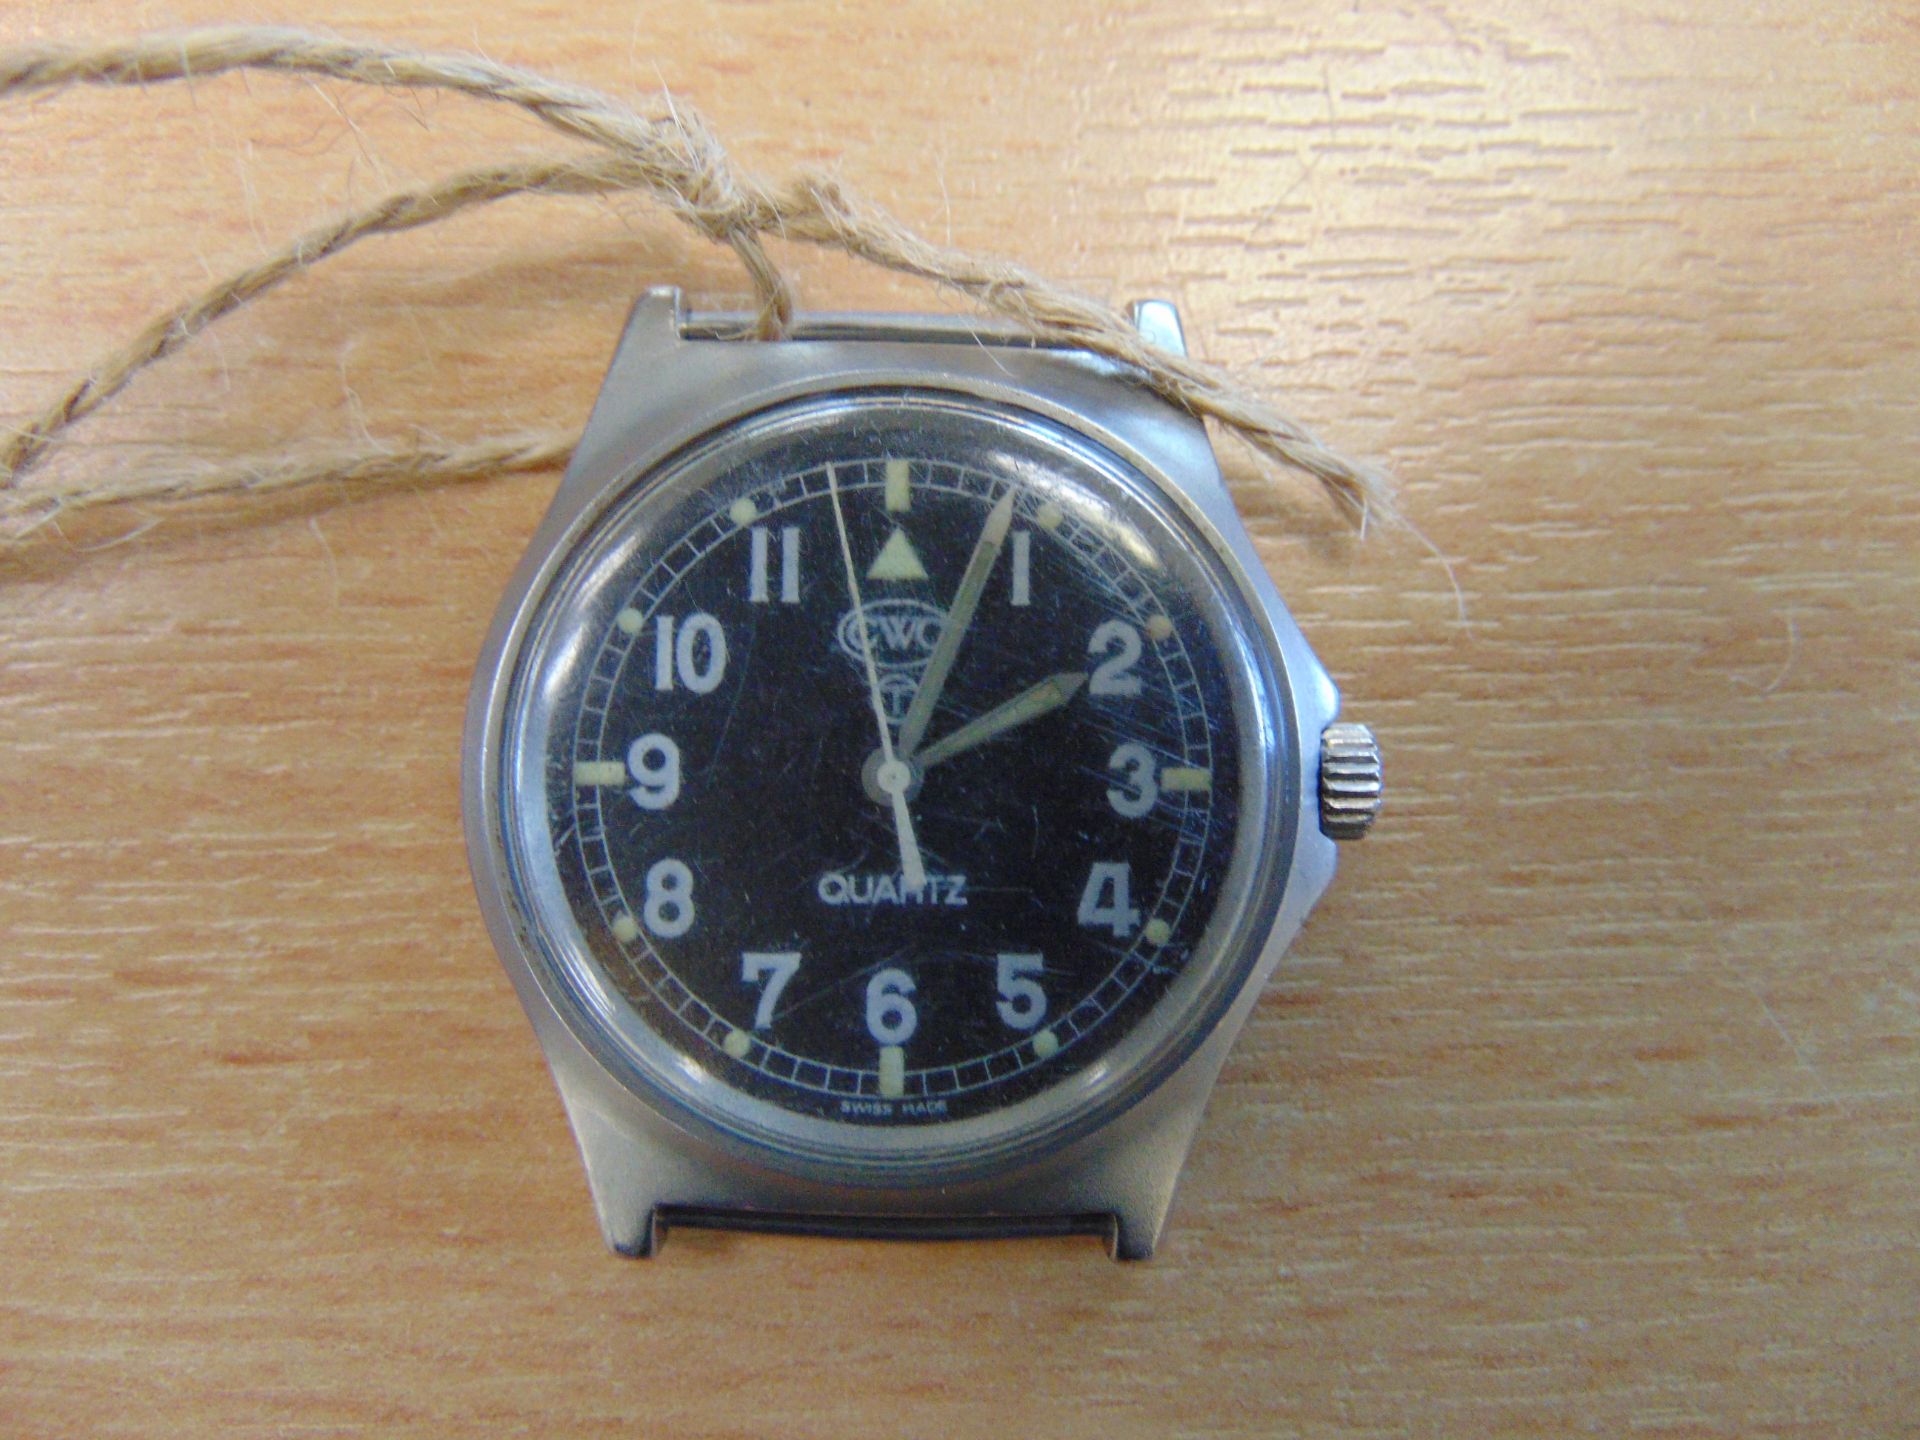 Rare CWC 0552 Royal Marines / Navy Issue Service Watch Nato Marks, Date 1990, * GULF WAR 1 * - Image 3 of 5